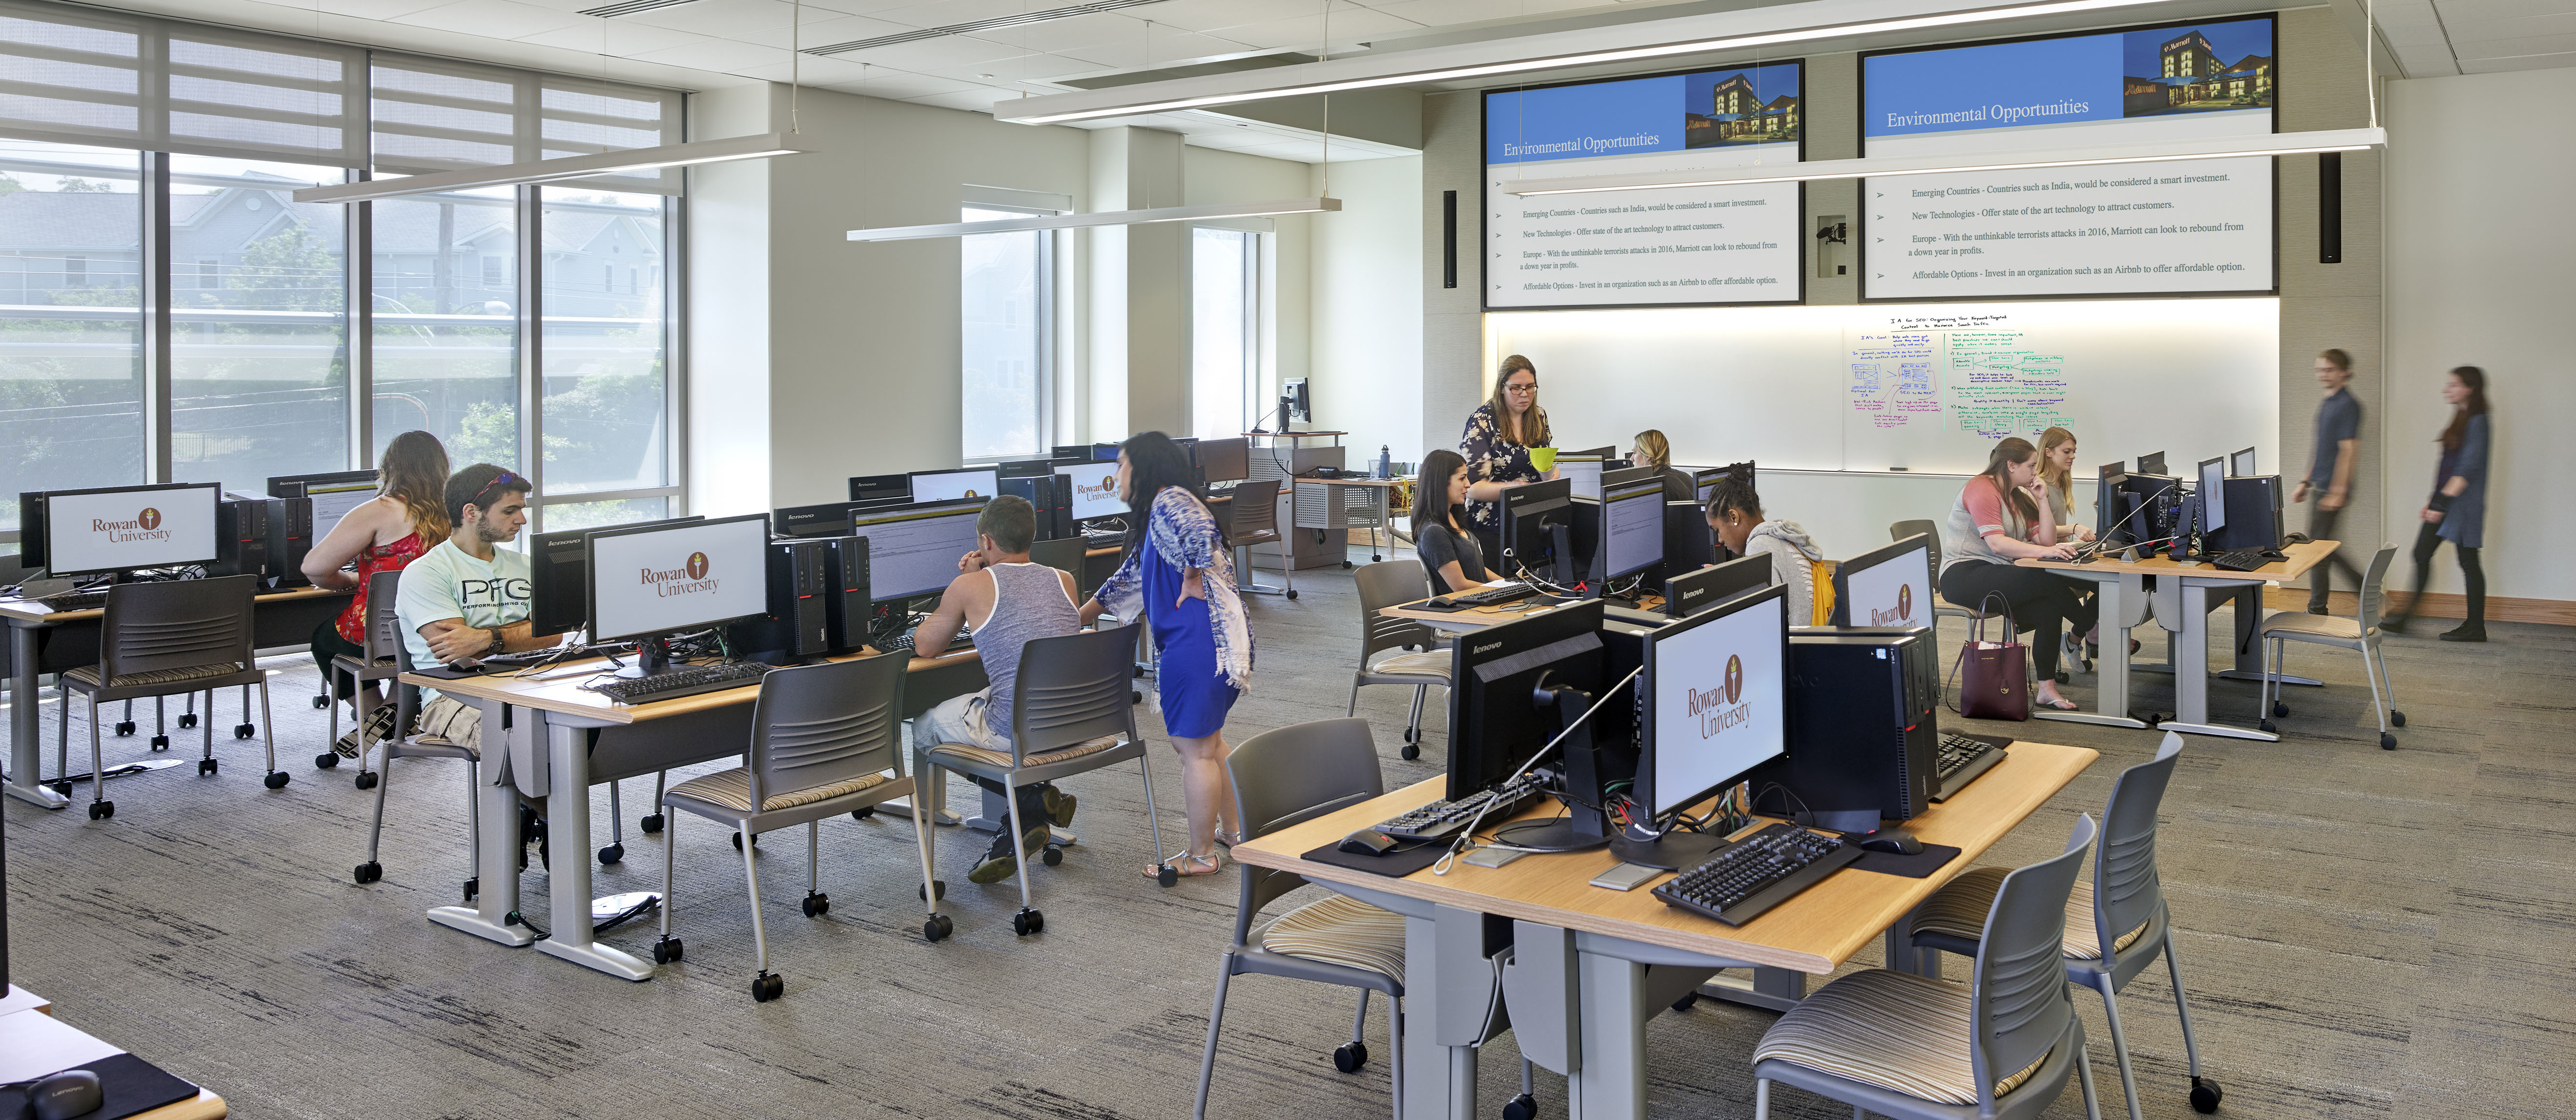 image of students and faculty in a technology-enhanced classroom at Rowan University 